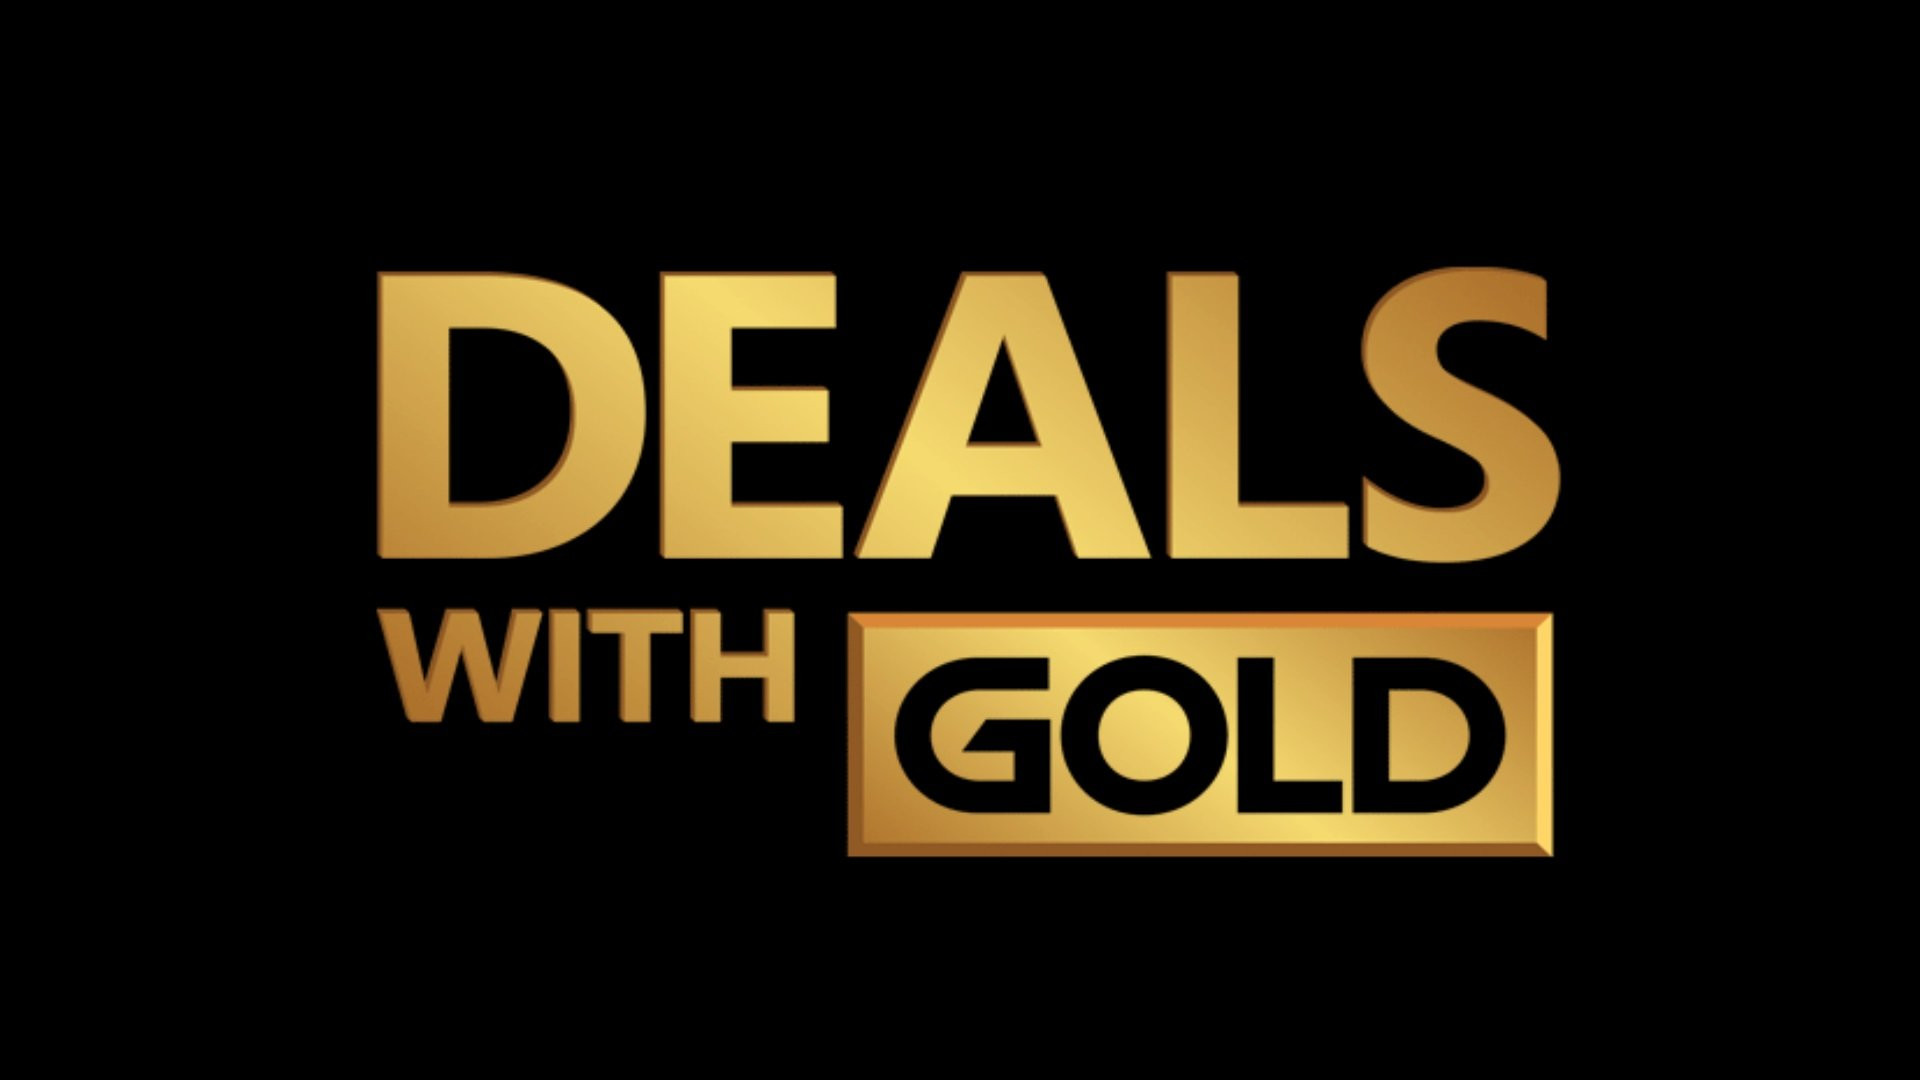 Deals with Gold semaine 52